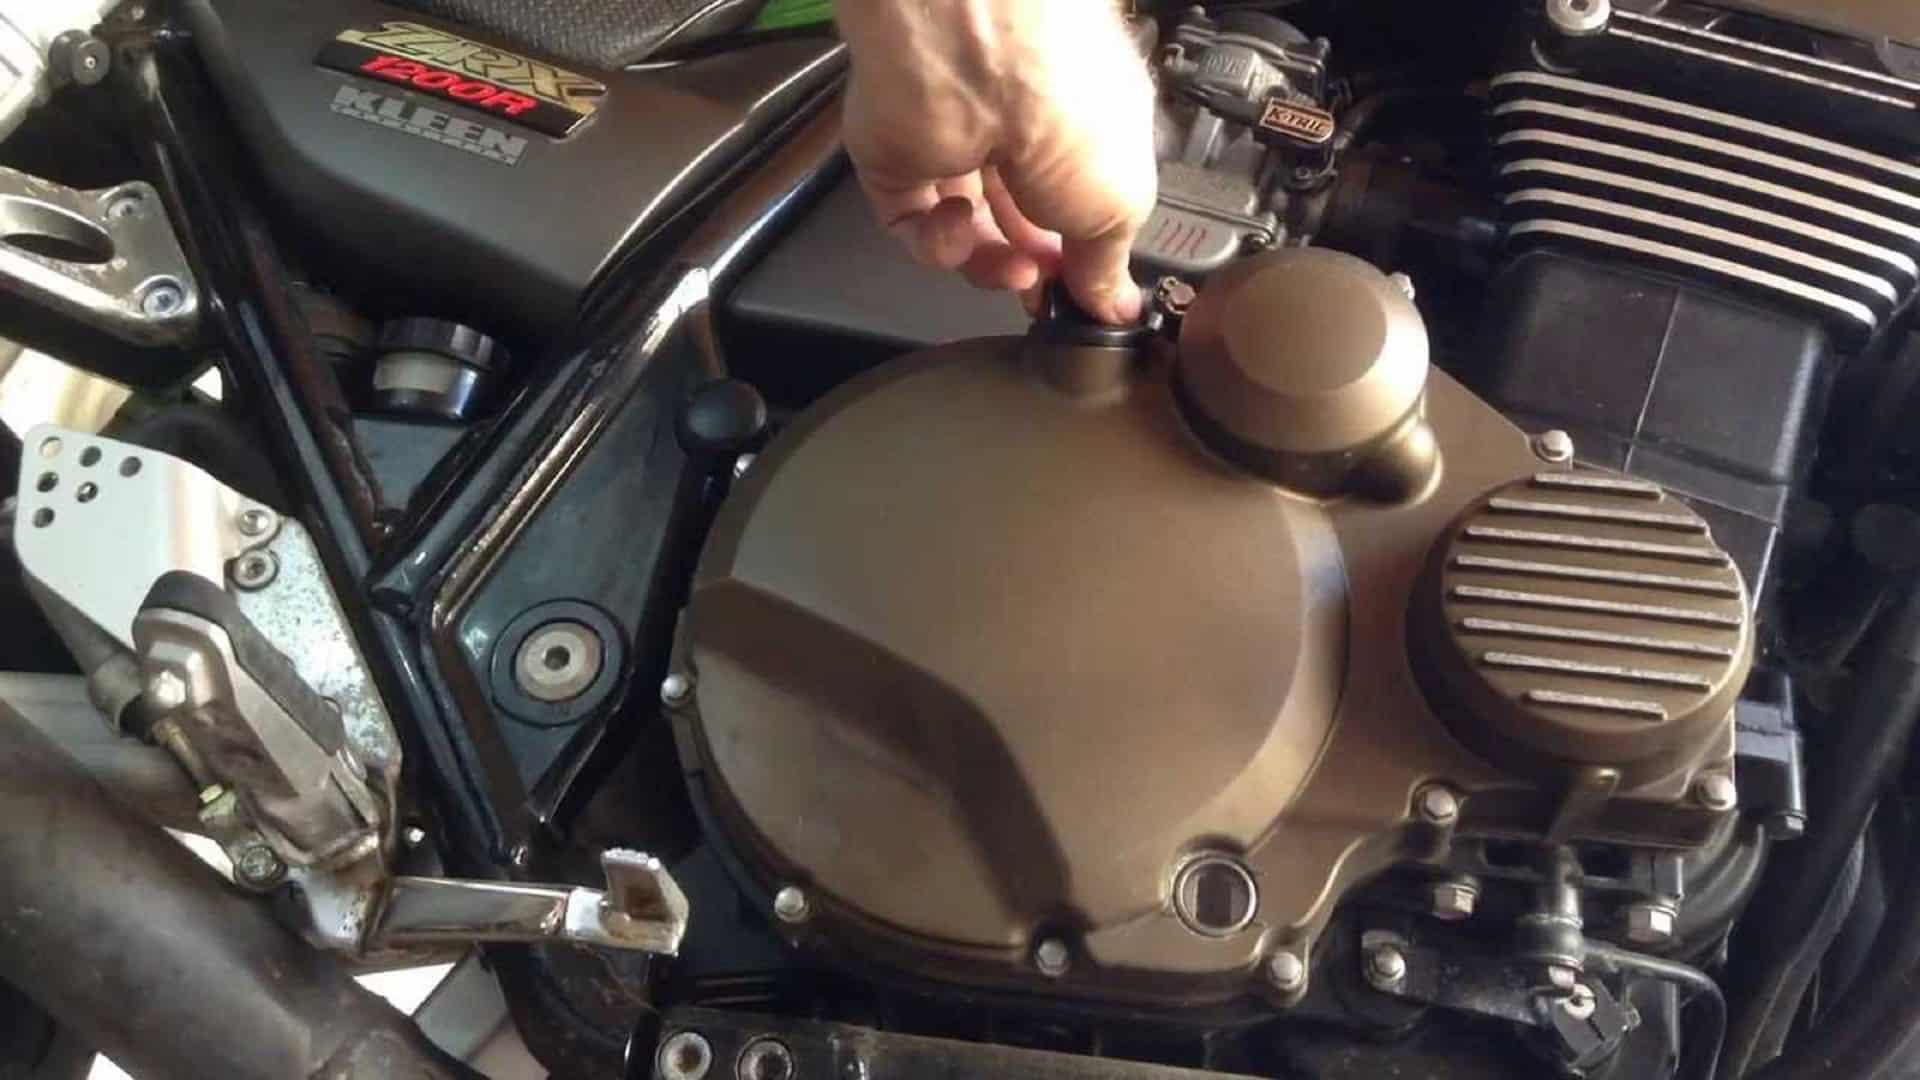 How Often To Change Oil In Motorcycle